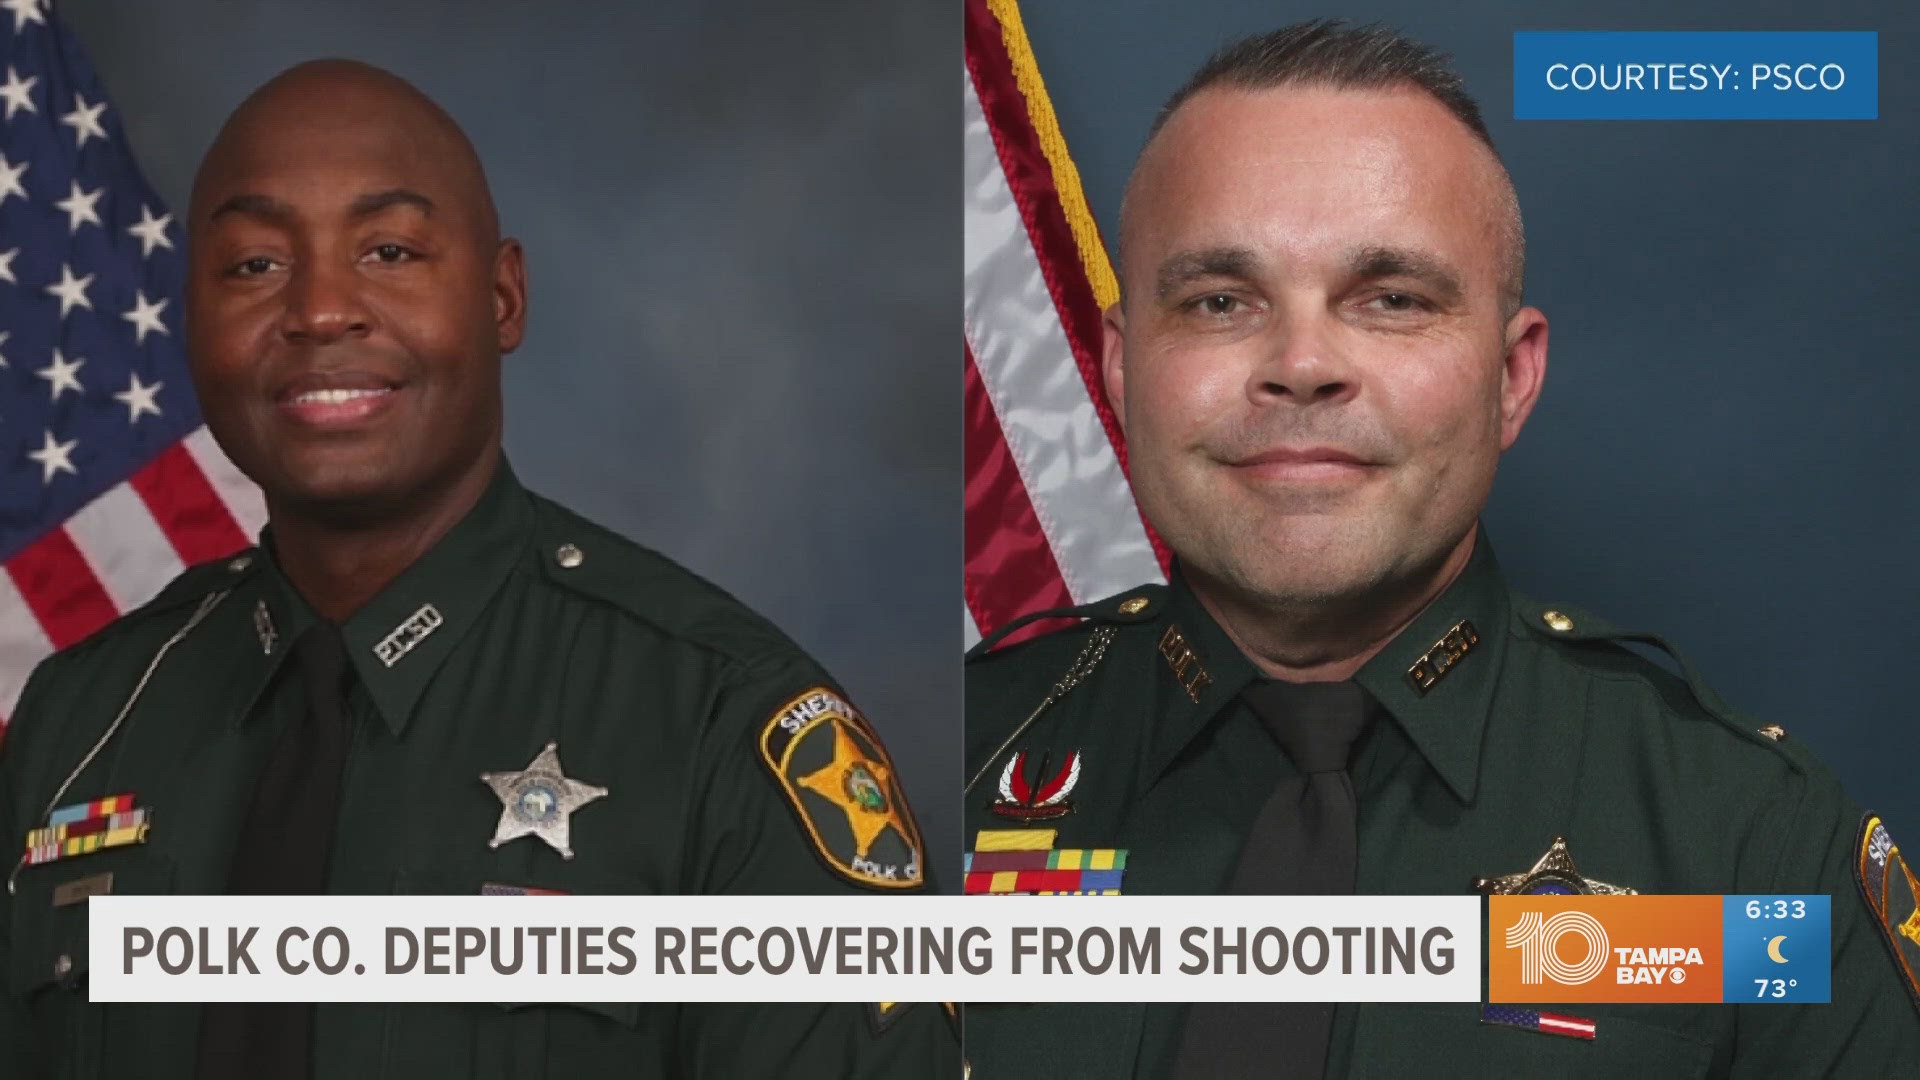 Deputy Craig Smith is back home recovering and Lieutenant Chad Anderson is expected to be moved from the ICU in the next few days.